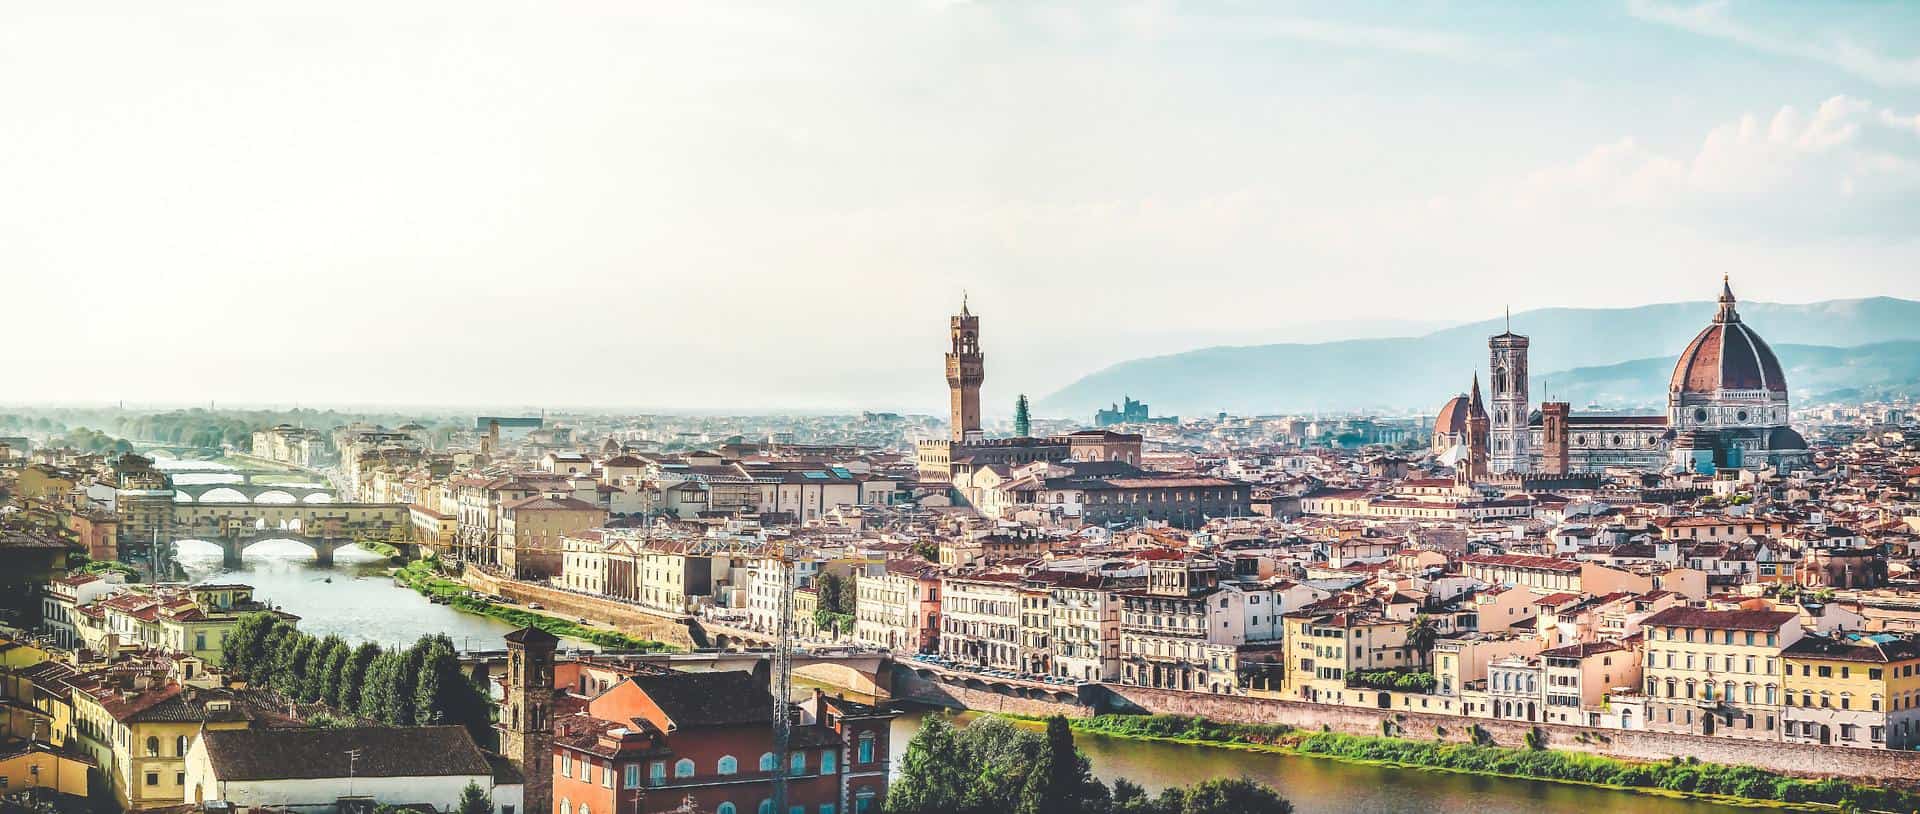 A Splendid Tour Around the City of Lilies: All the Perfect Reasons You Should Visit Florence, Italy